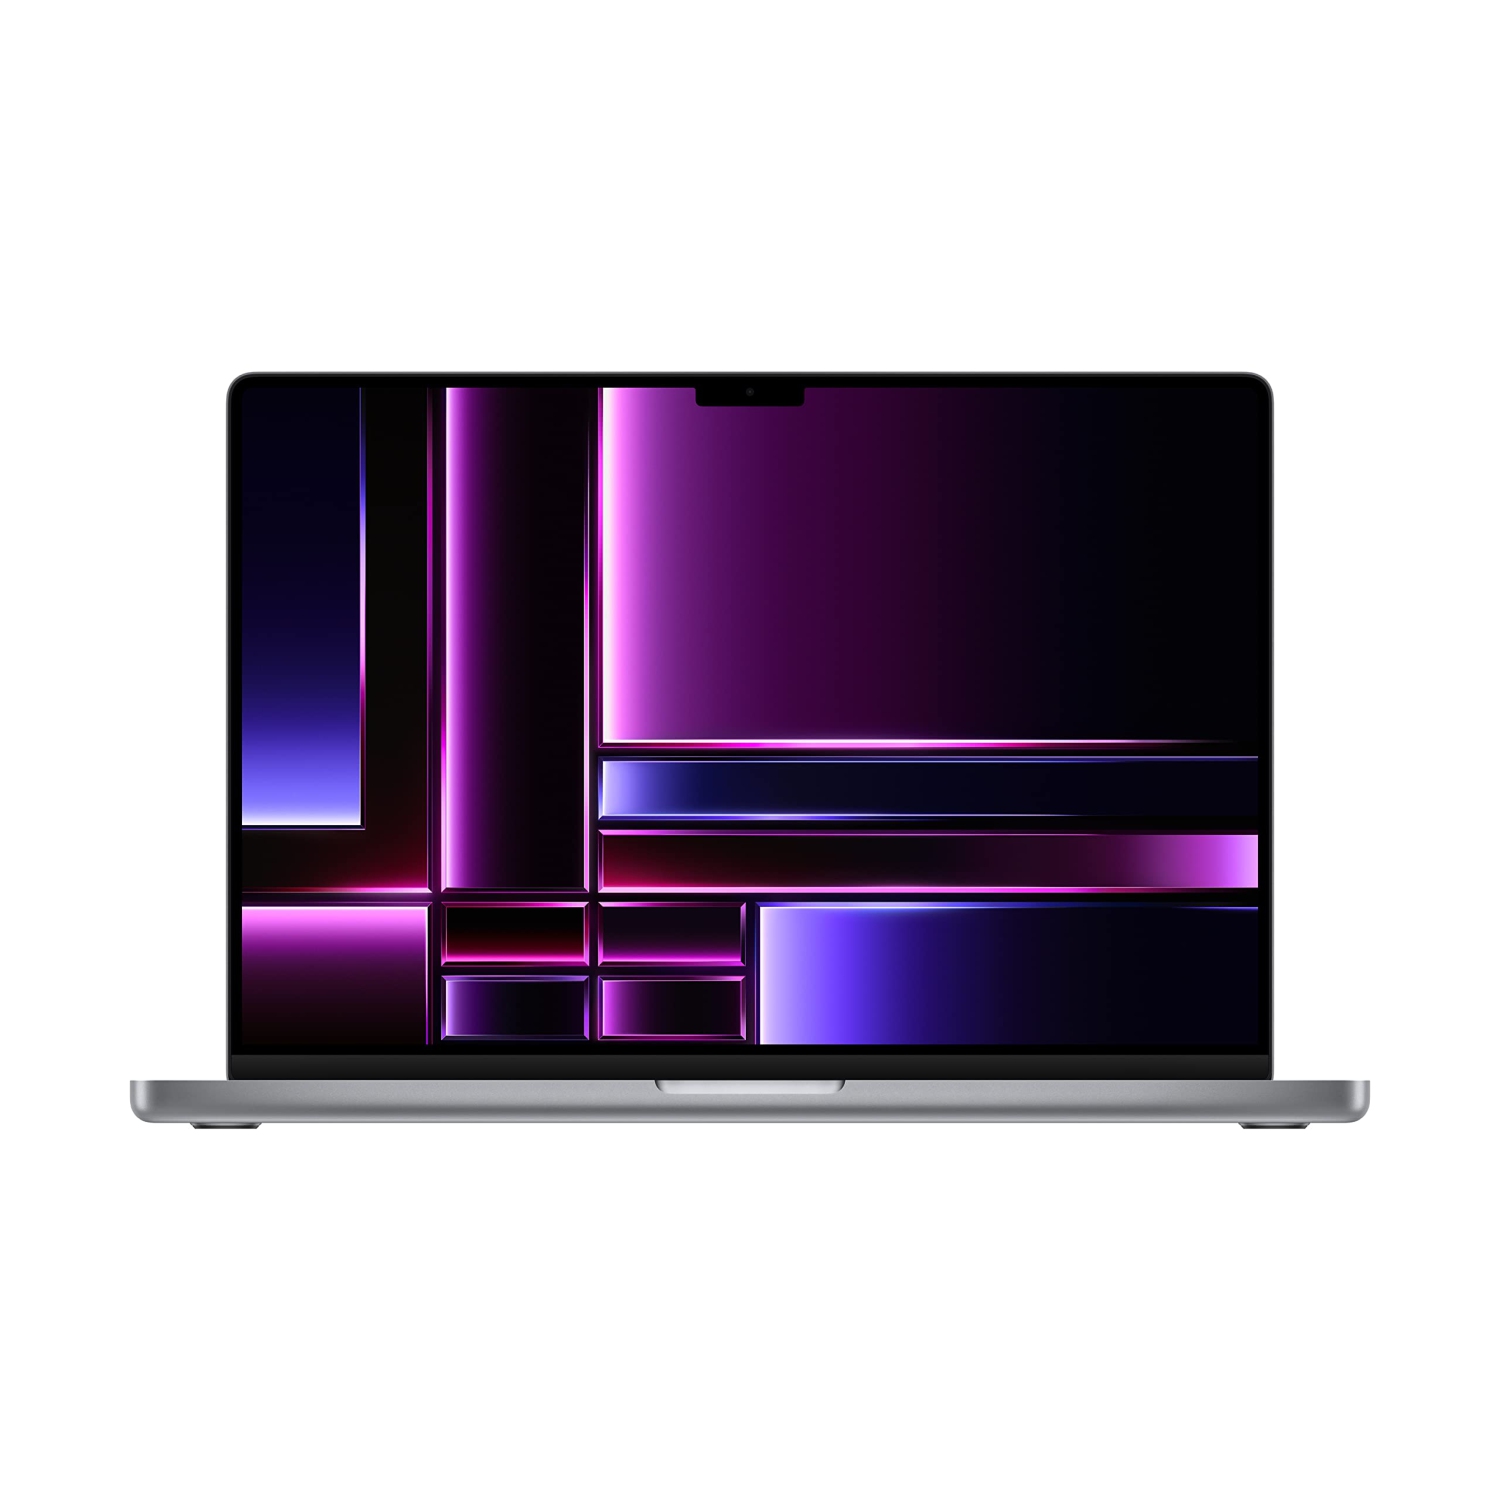 Refurbished (Excellent) - Apple 2023 16" MacBook Pro M2 Pro chip, 16GB Unified Memory, 1TB SSD Storage (Space Gray)